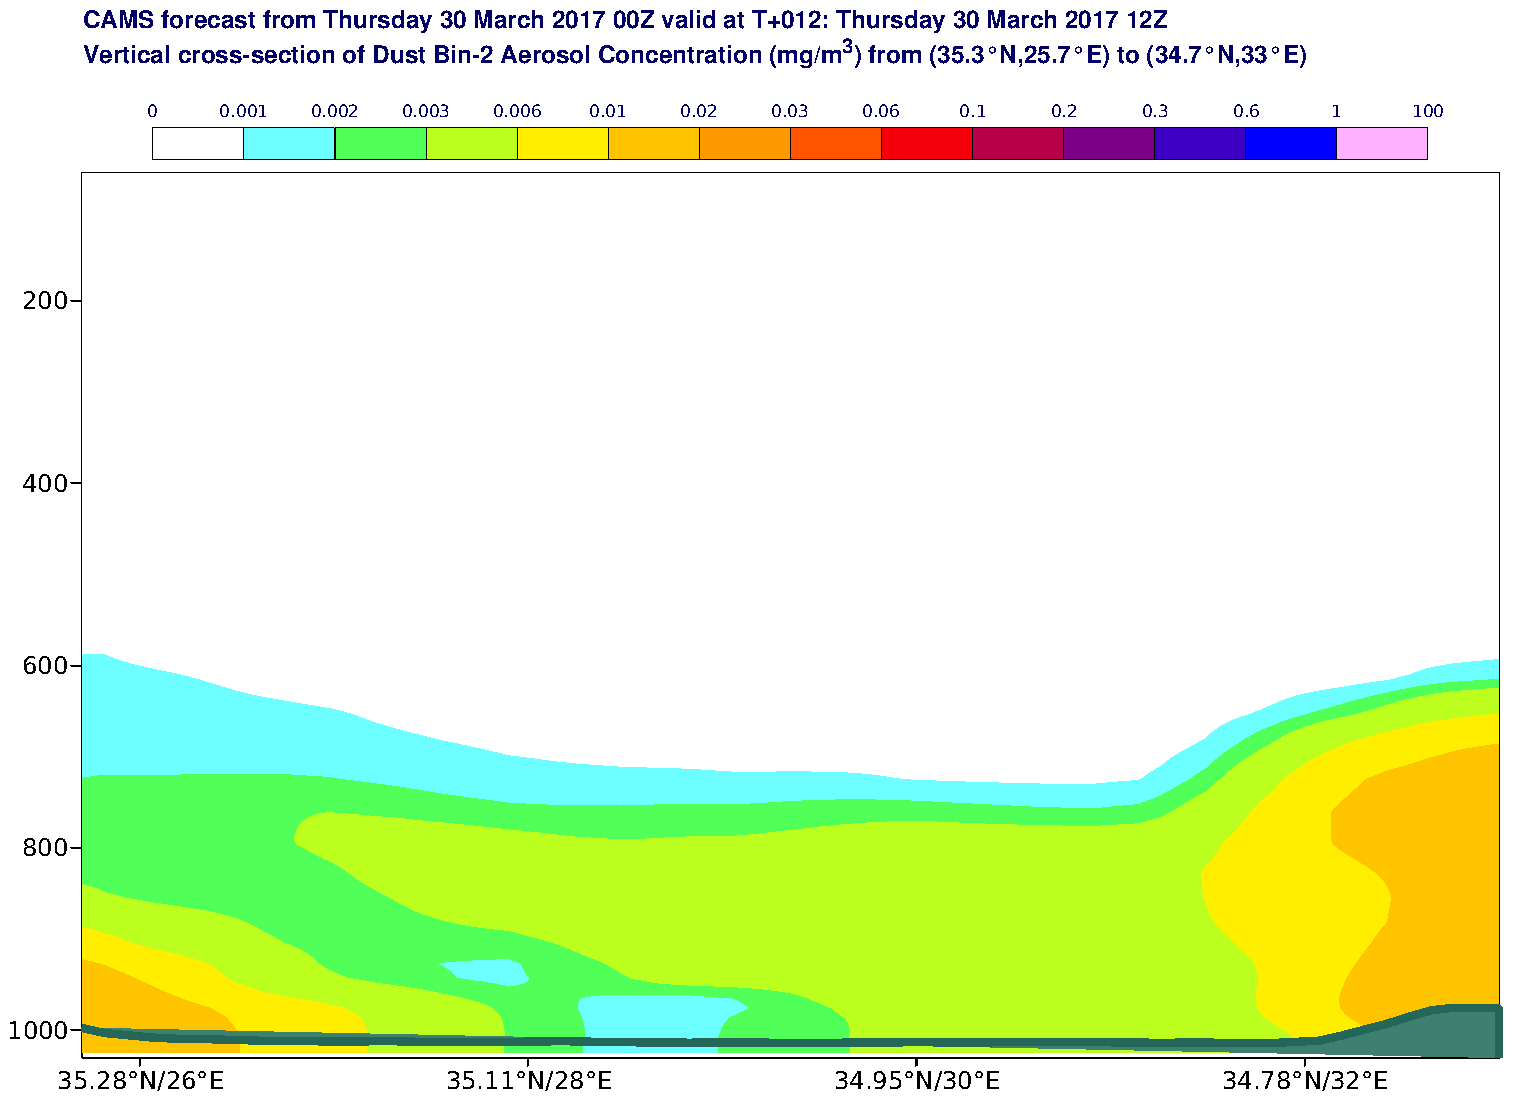 Vertical cross-section of Dust Bin-2 Aerosol Concentration (mg/m3) valid at T12 - 2017-03-30 12:00